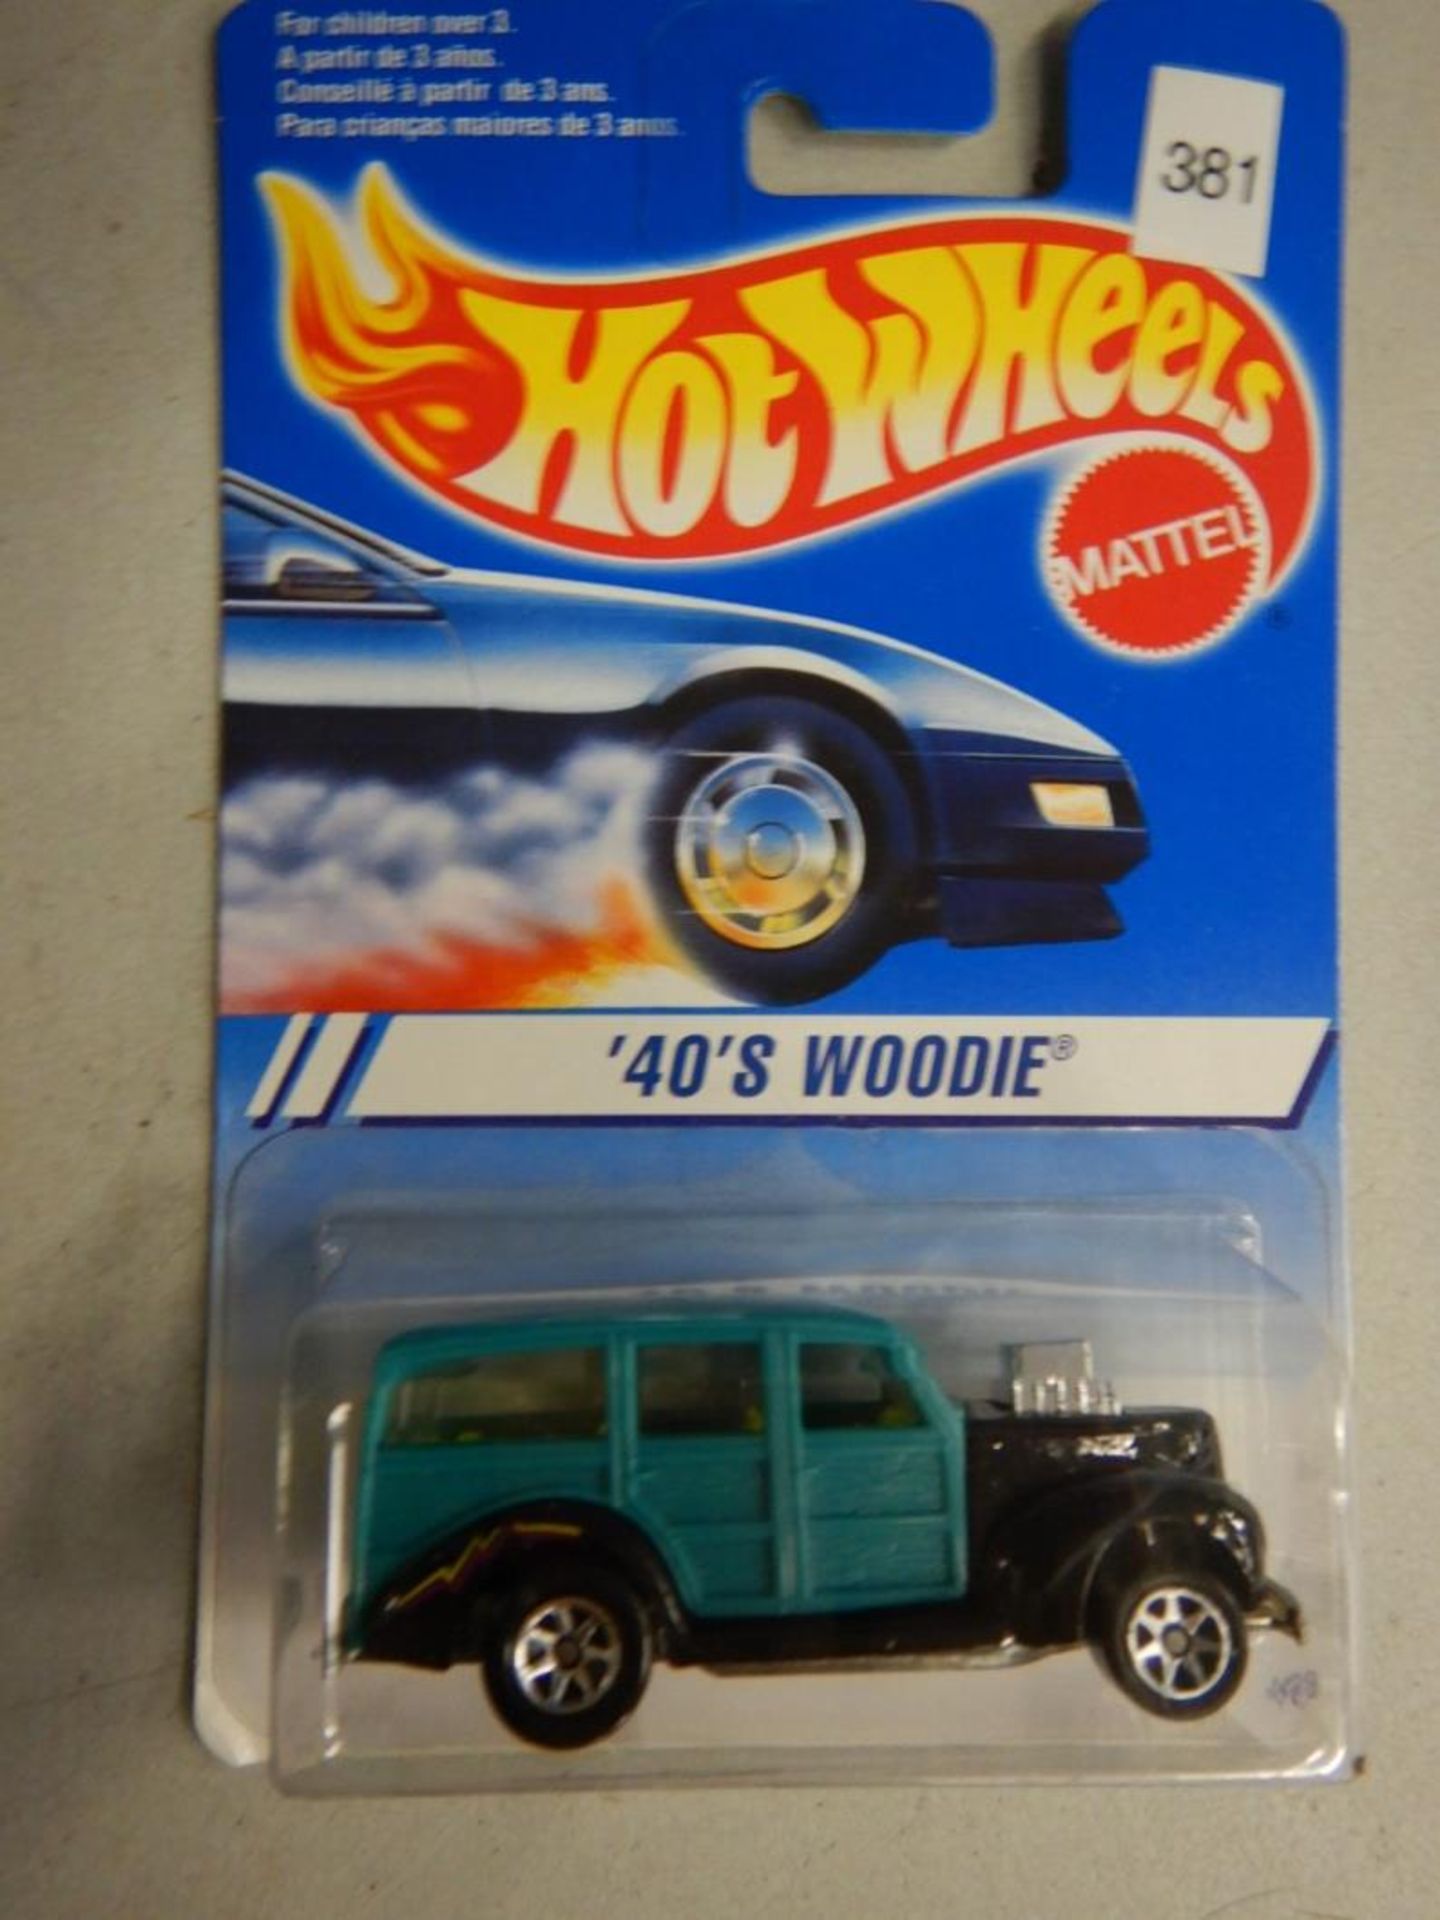 HOT WHEELS CARS - "67 CHEVELLE SS 396", "MERCEDES SL 64", "LINCOLN CONTINENTAL", "40'S WOODIE", " - Image 6 of 6